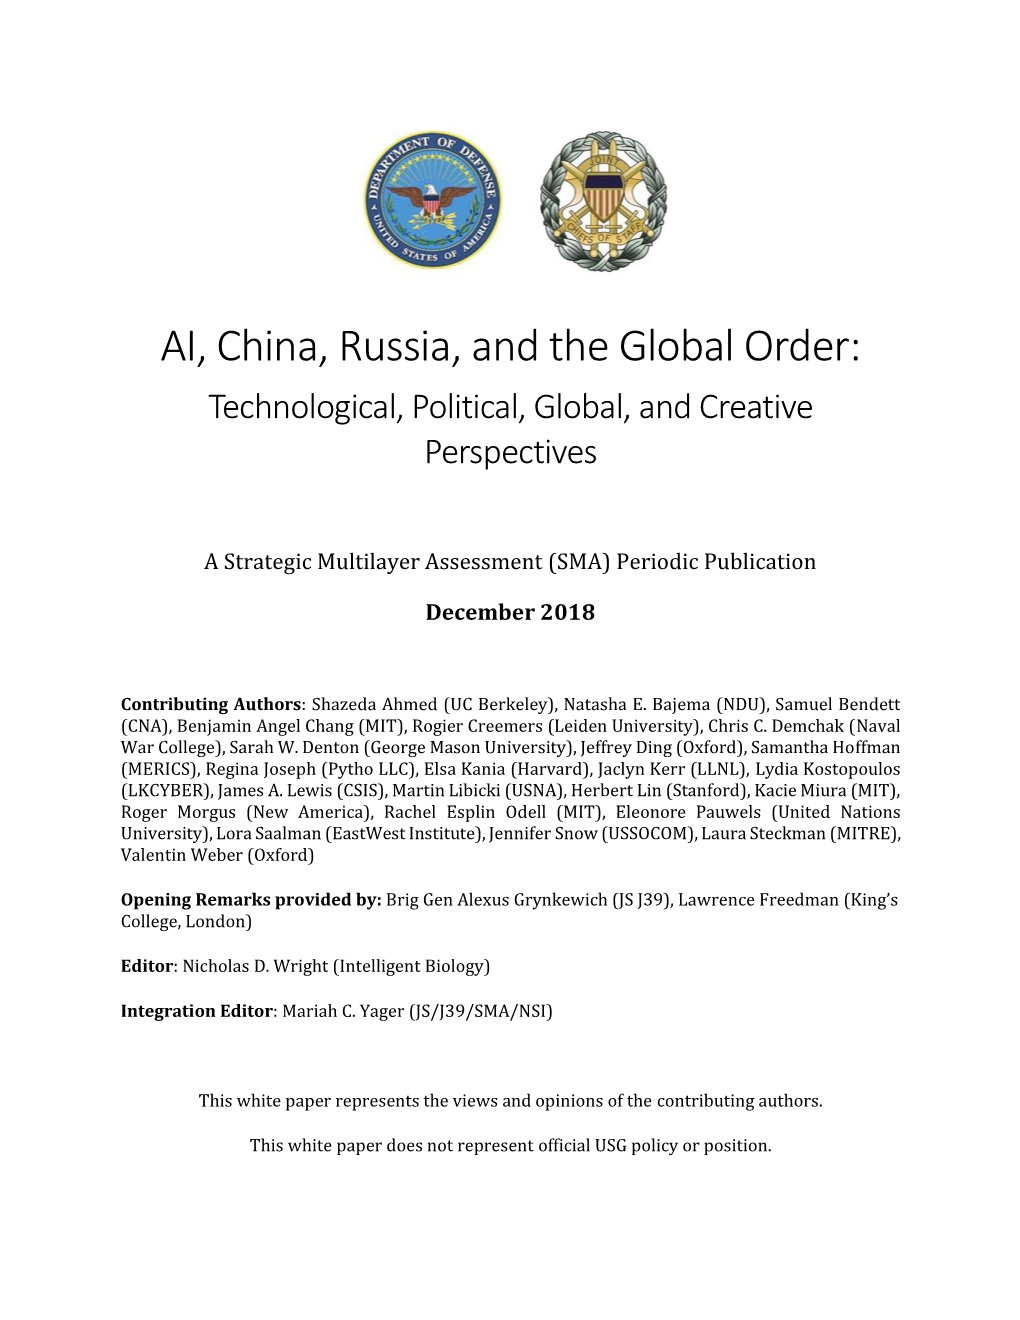 AI, China, Russia, and the Global Order: Technological, Political, Global, and Creative Perspectives